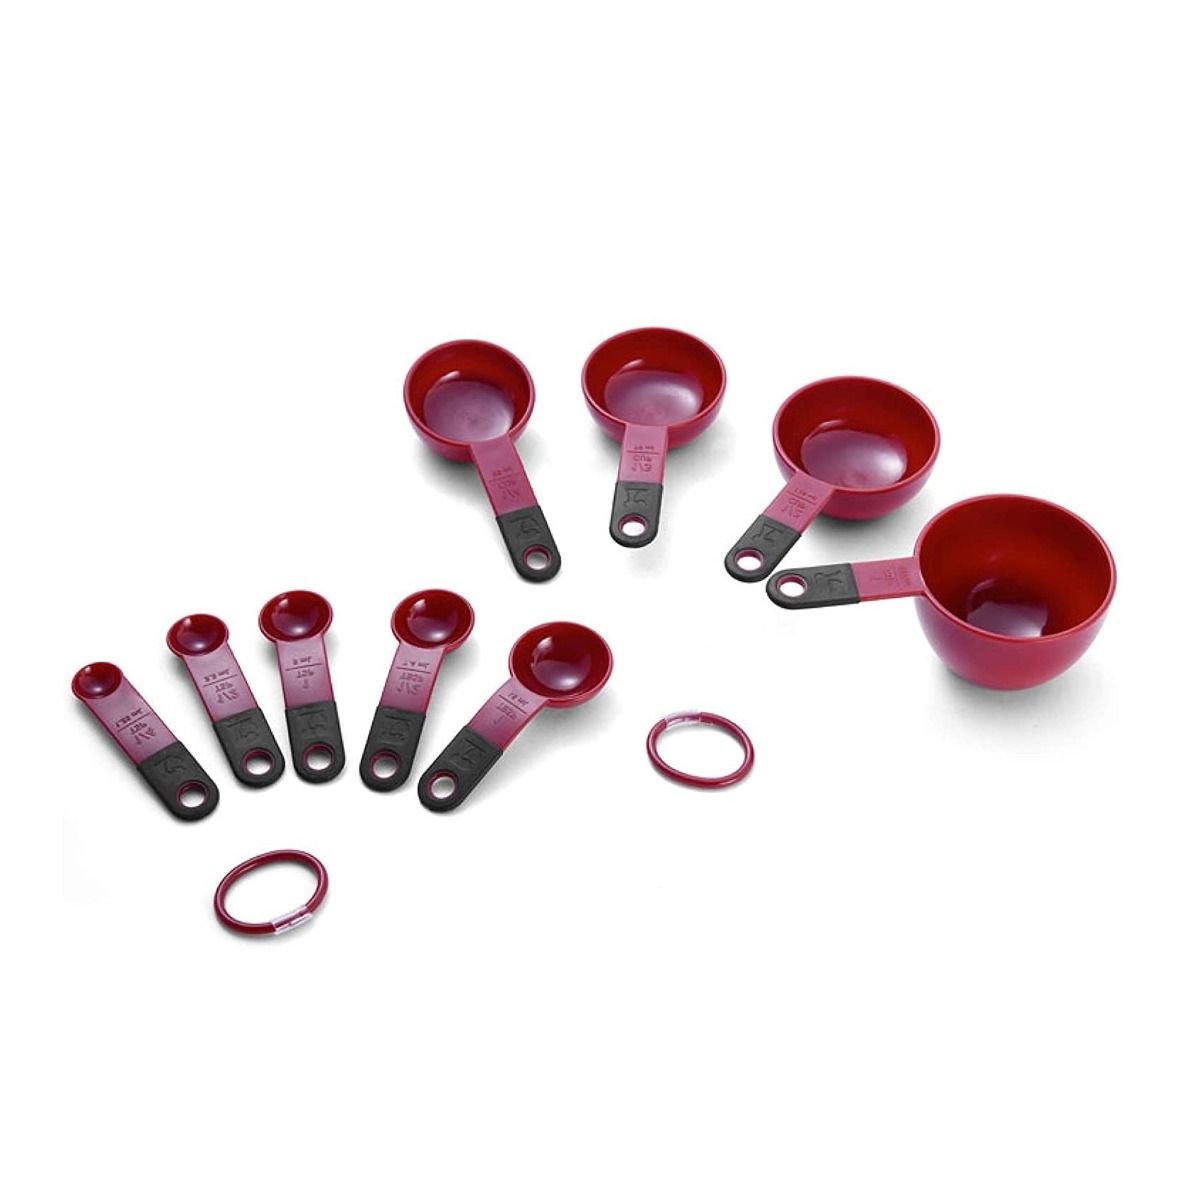 Kuhn Rikon Colorful Measuring Cups and Spoons Set 